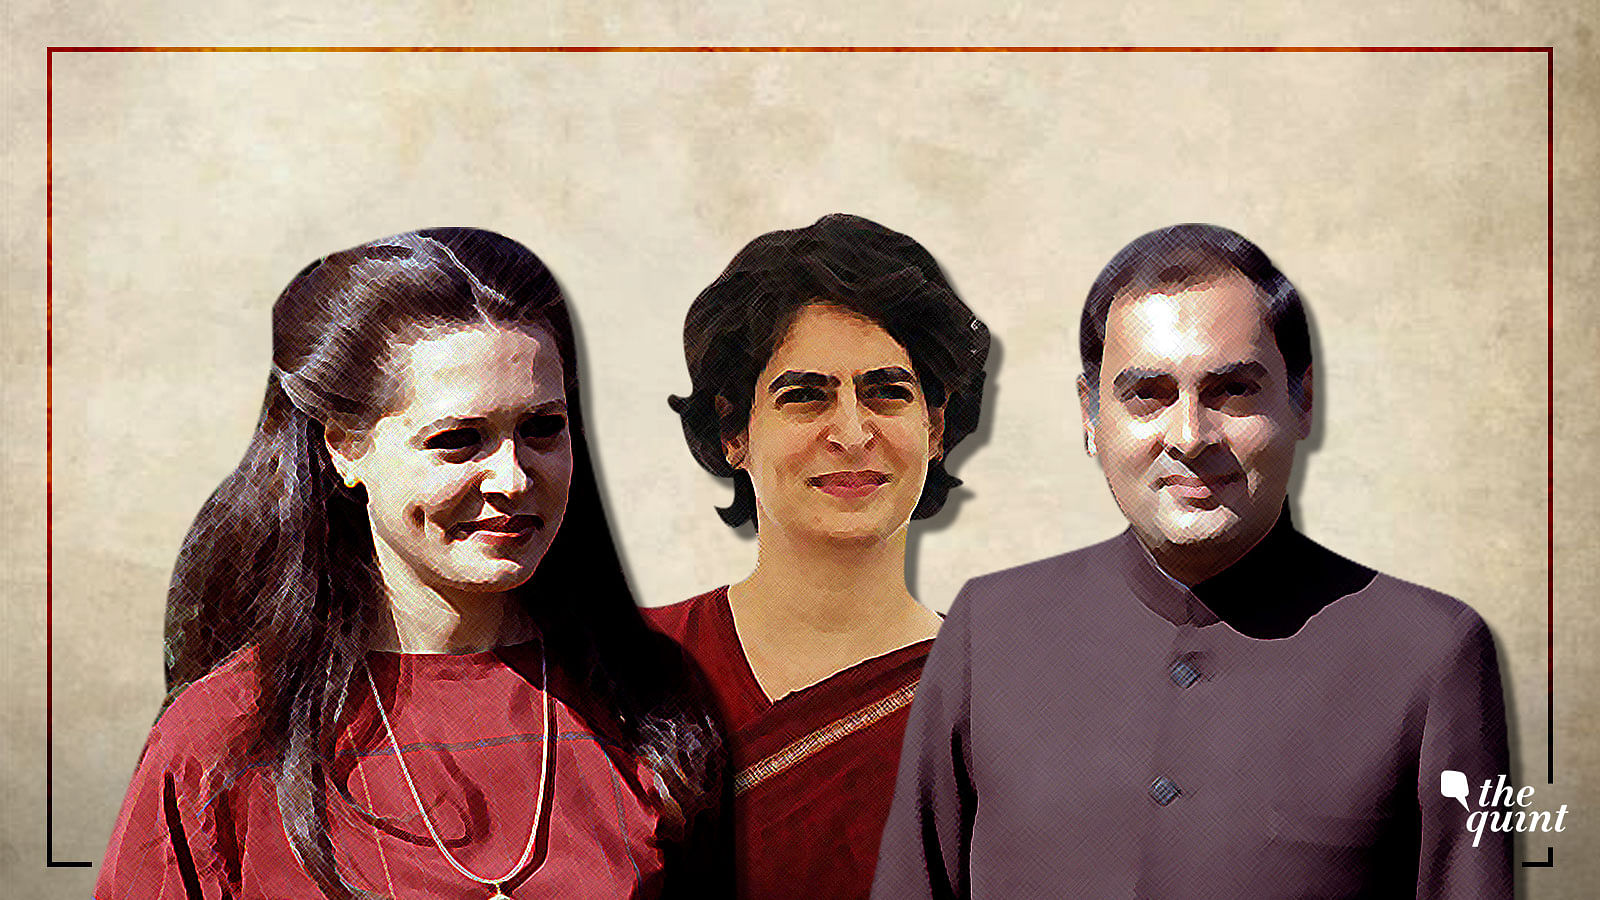 On Rajiv Gandhi’s death anniversary, we take a look at the man, in the words of his wife Sonia and daughter Priyanka Vadra.